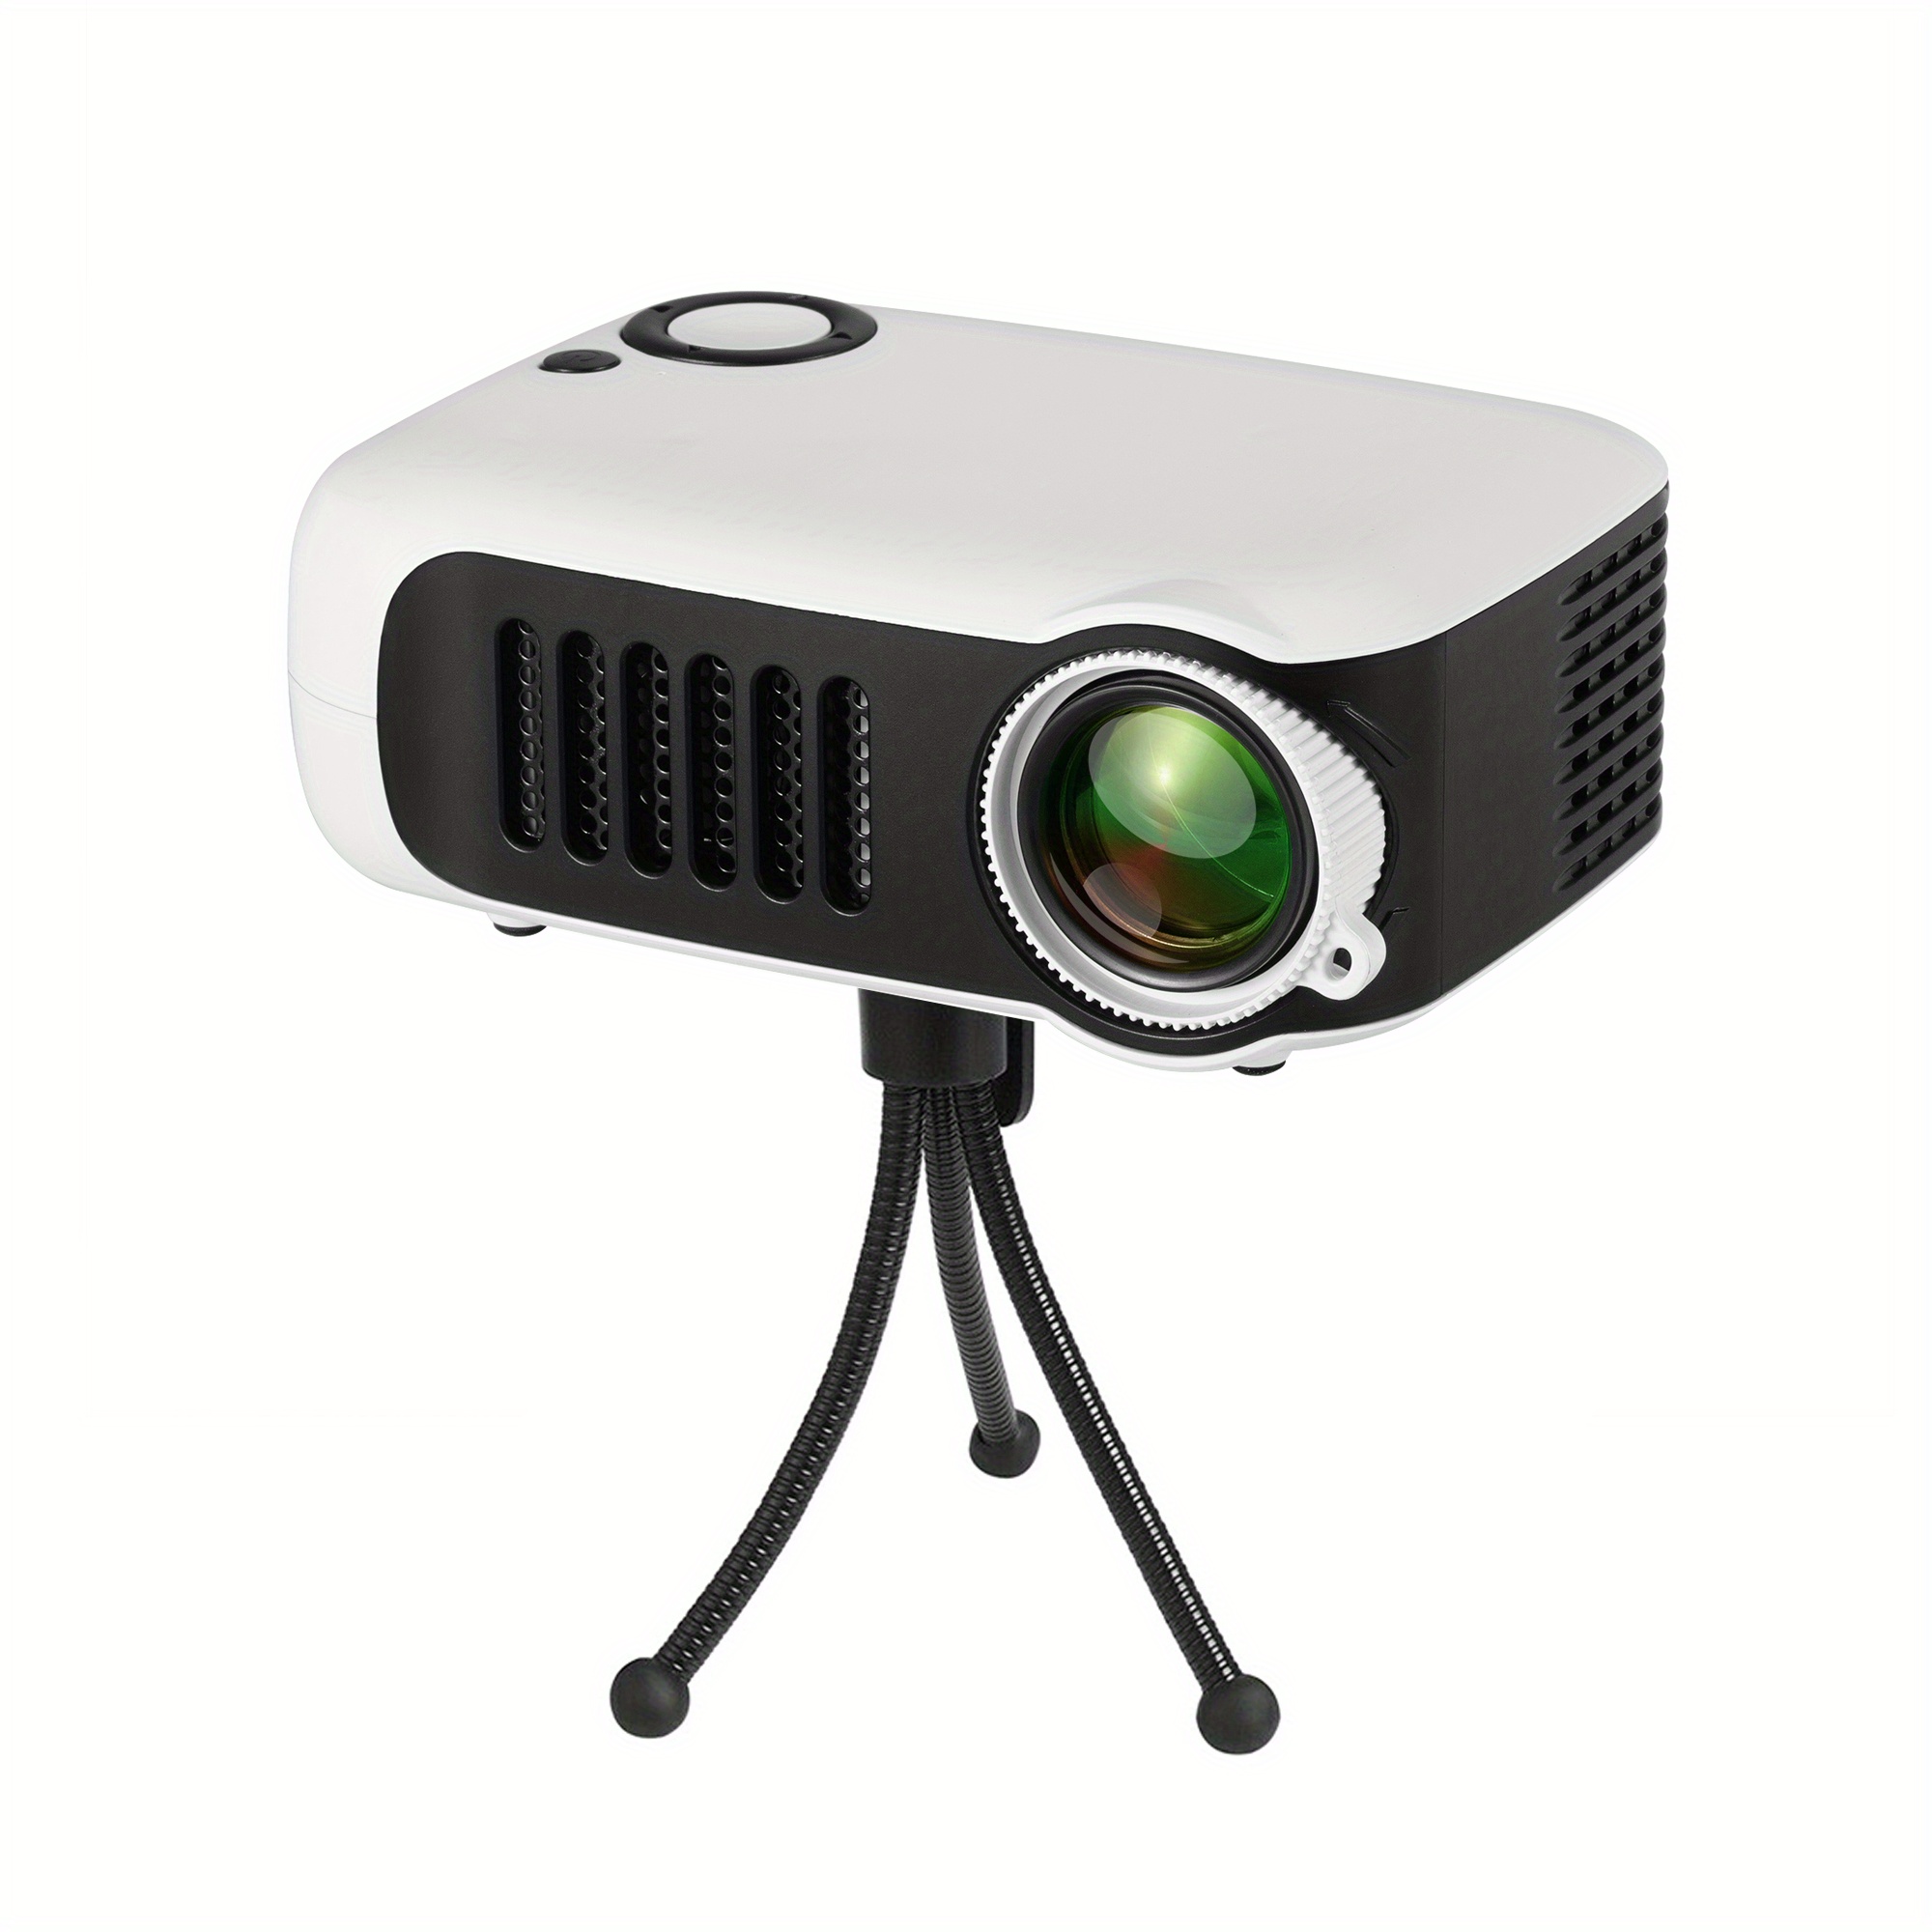 Portable Mini Projector: Enjoy 1080p Movies Anywhere With Outdoor